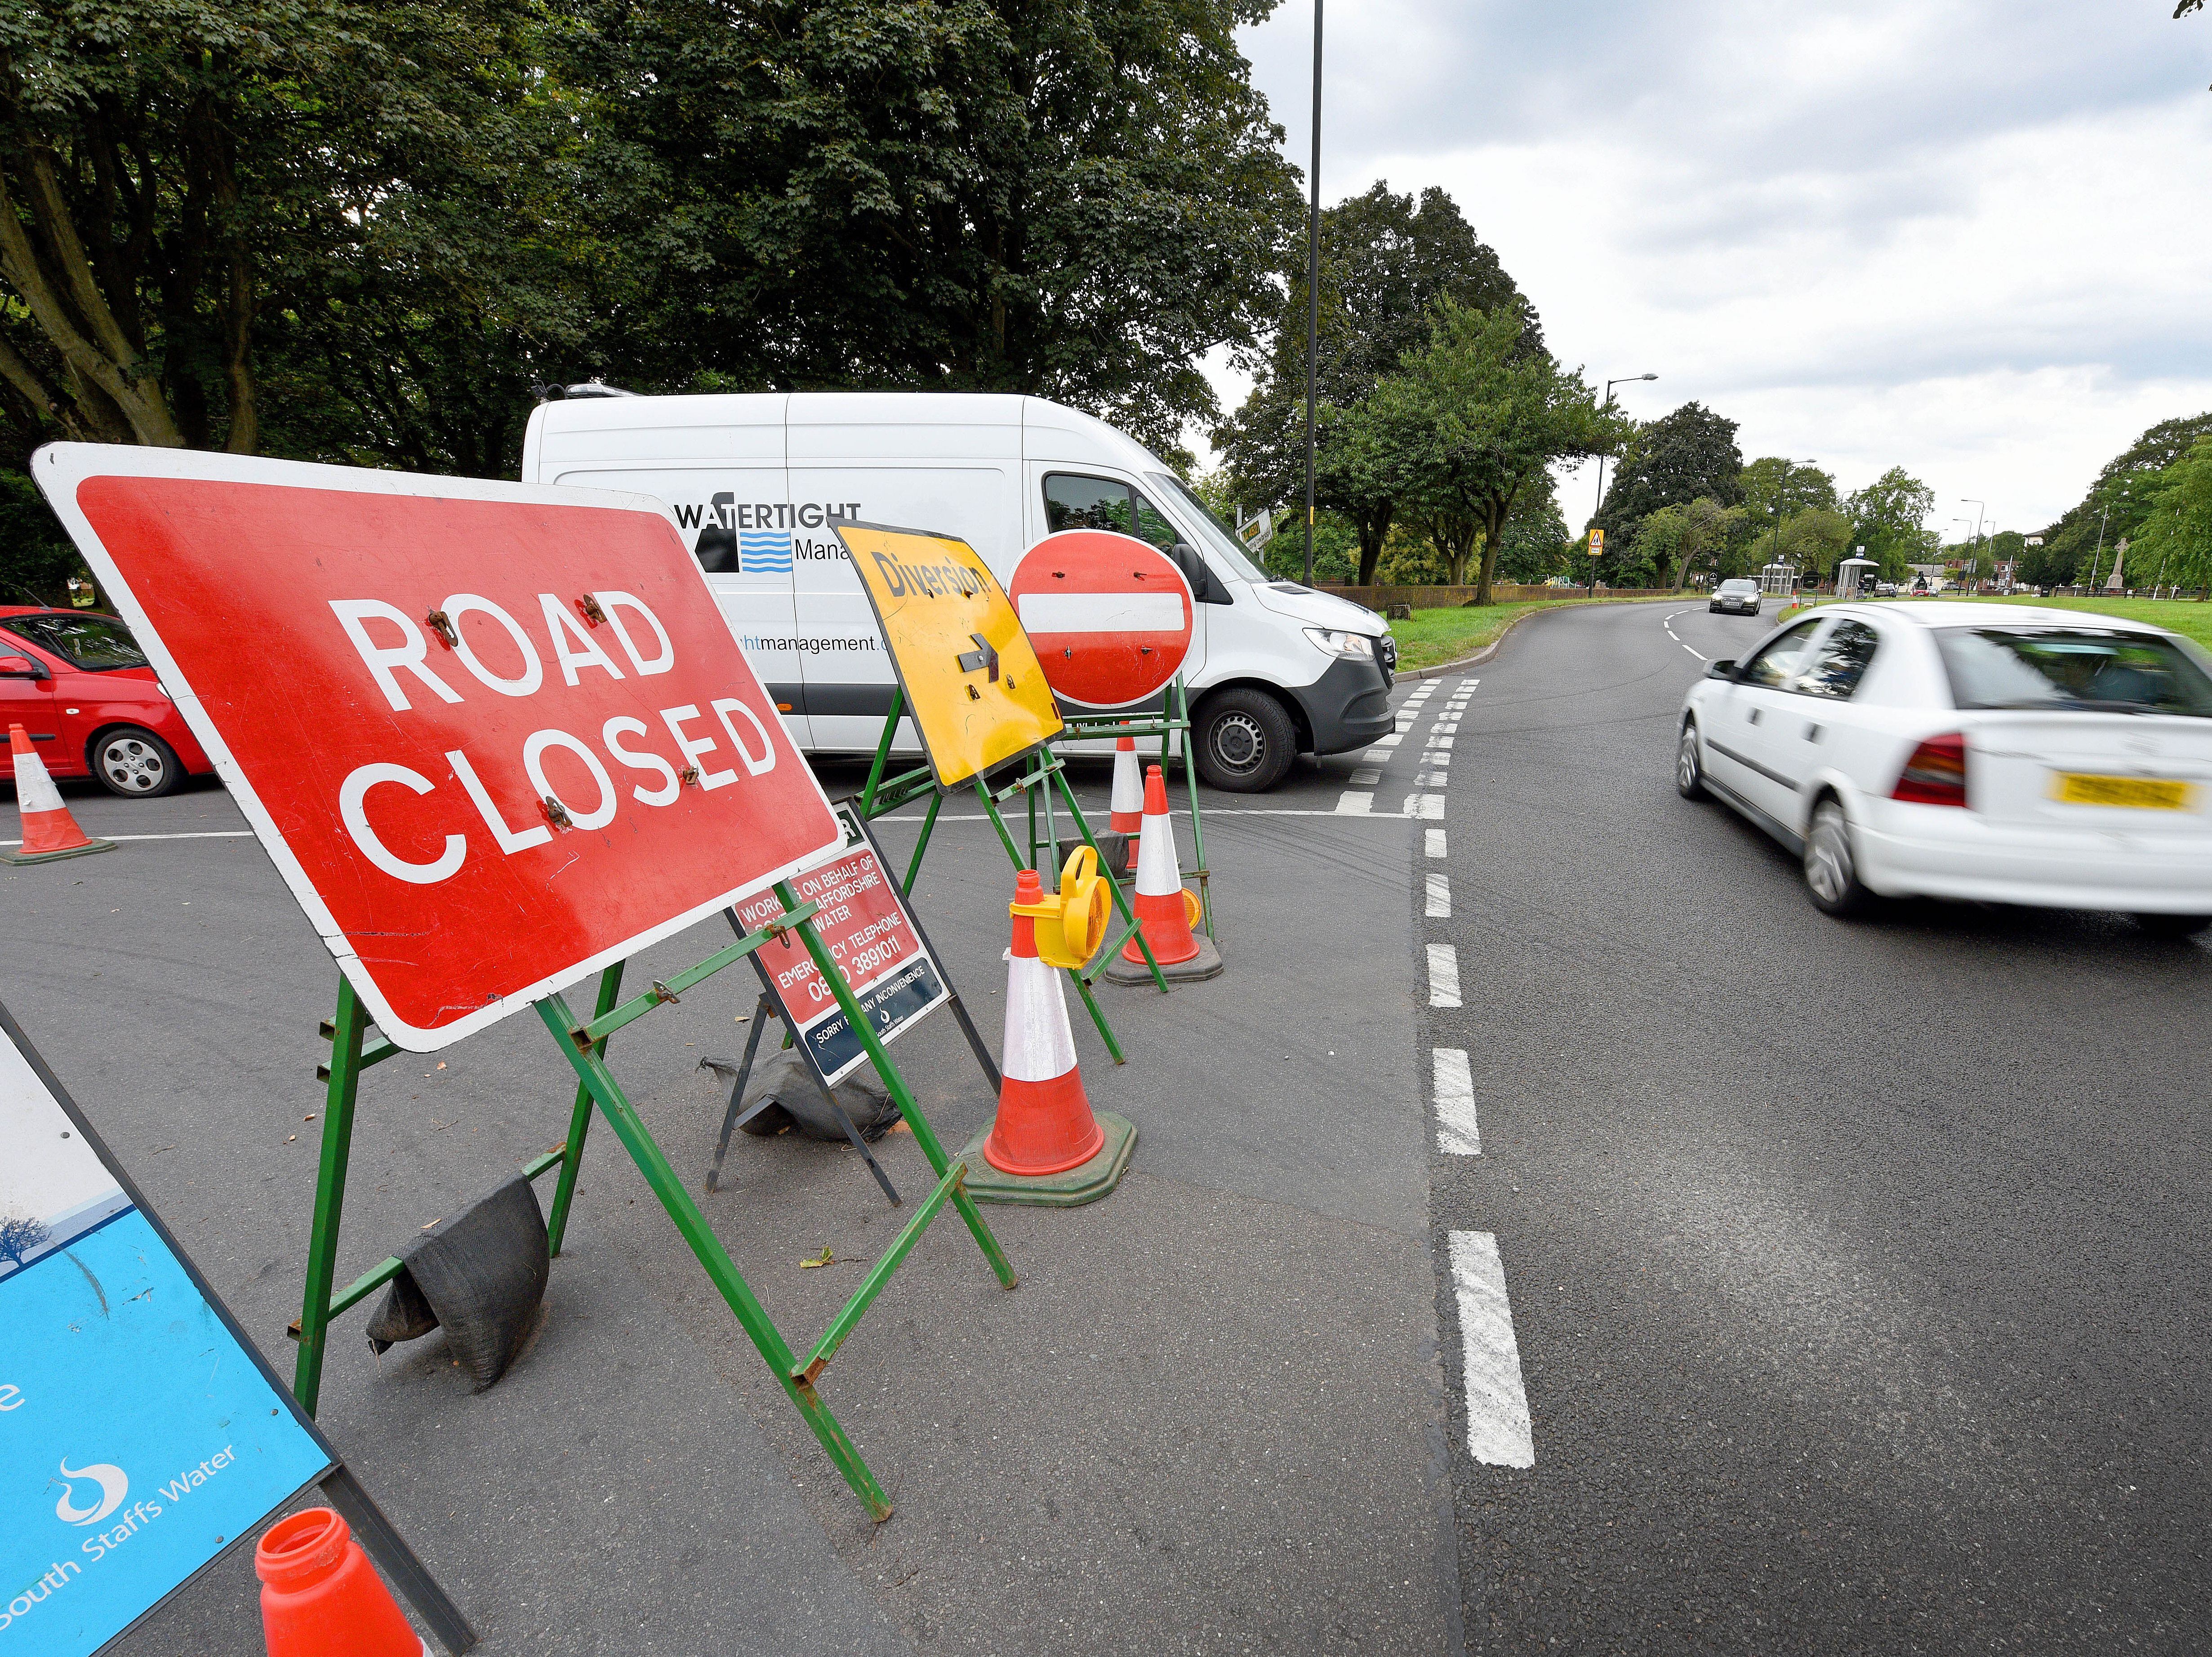 Road closures announced in Sandwell for range of works – here's where they will be